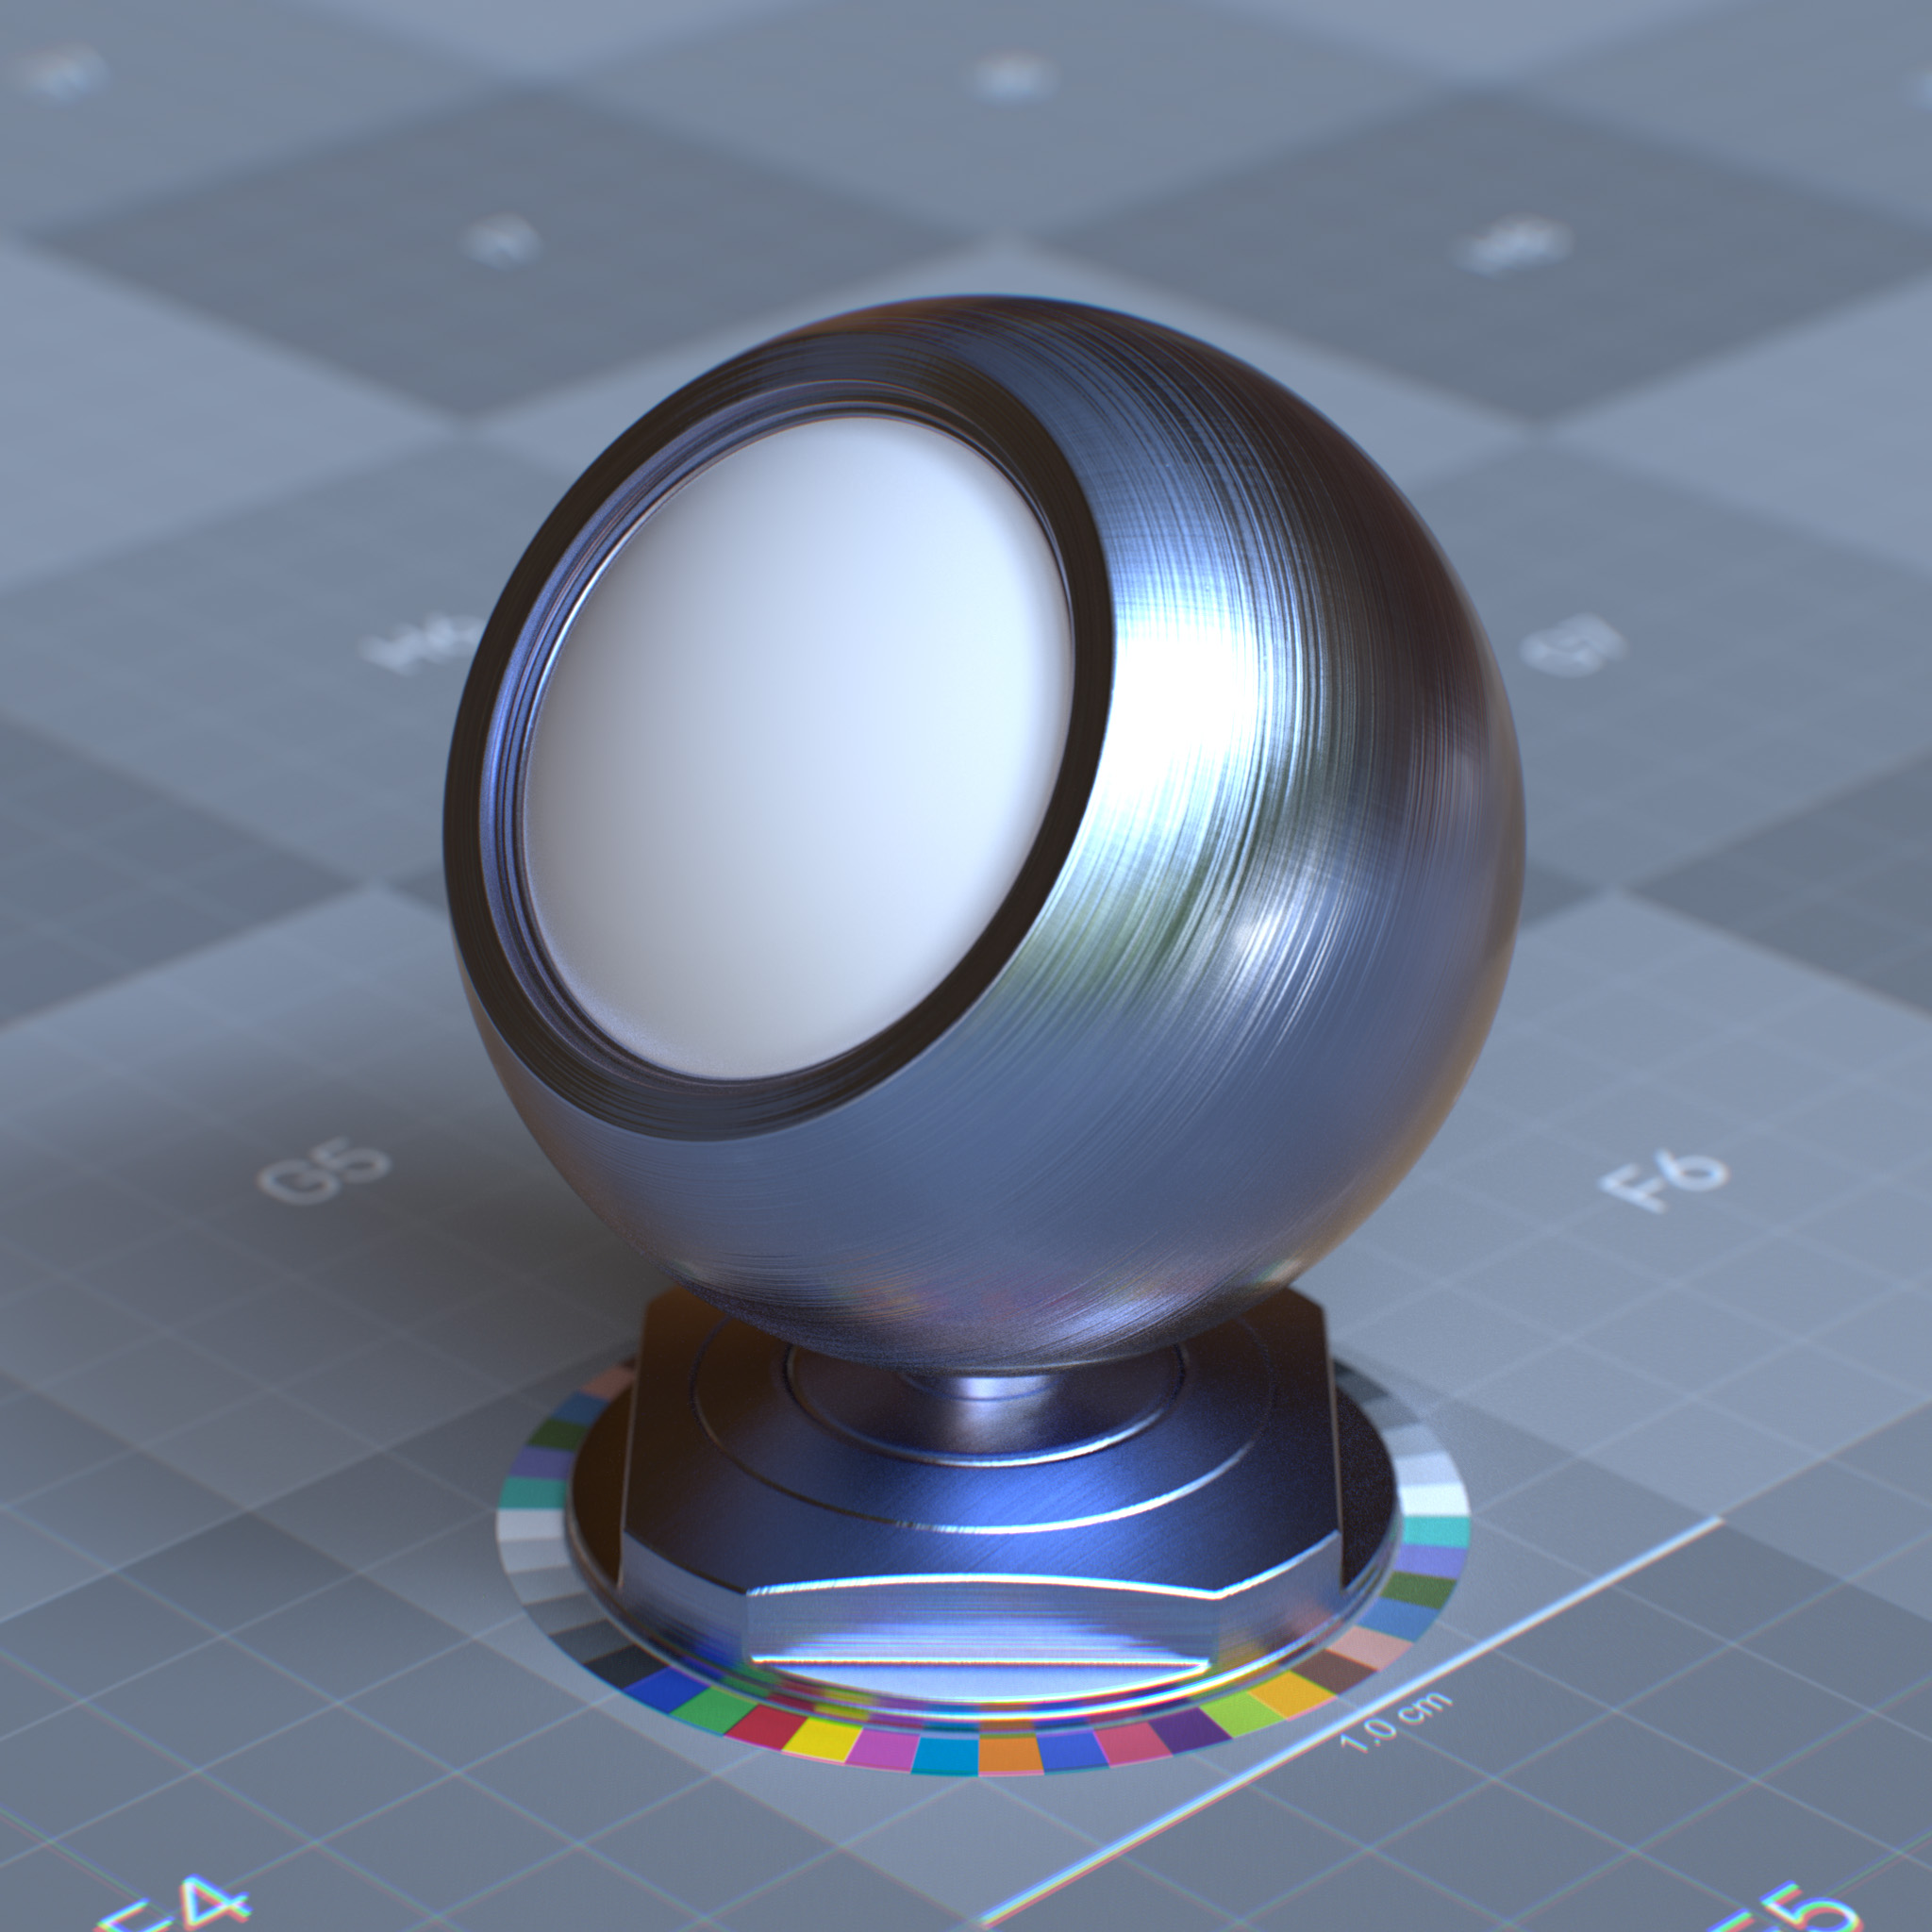 rtx_material_omnisurfacebase_specular_reflection_anisotropy_rotation_1p0